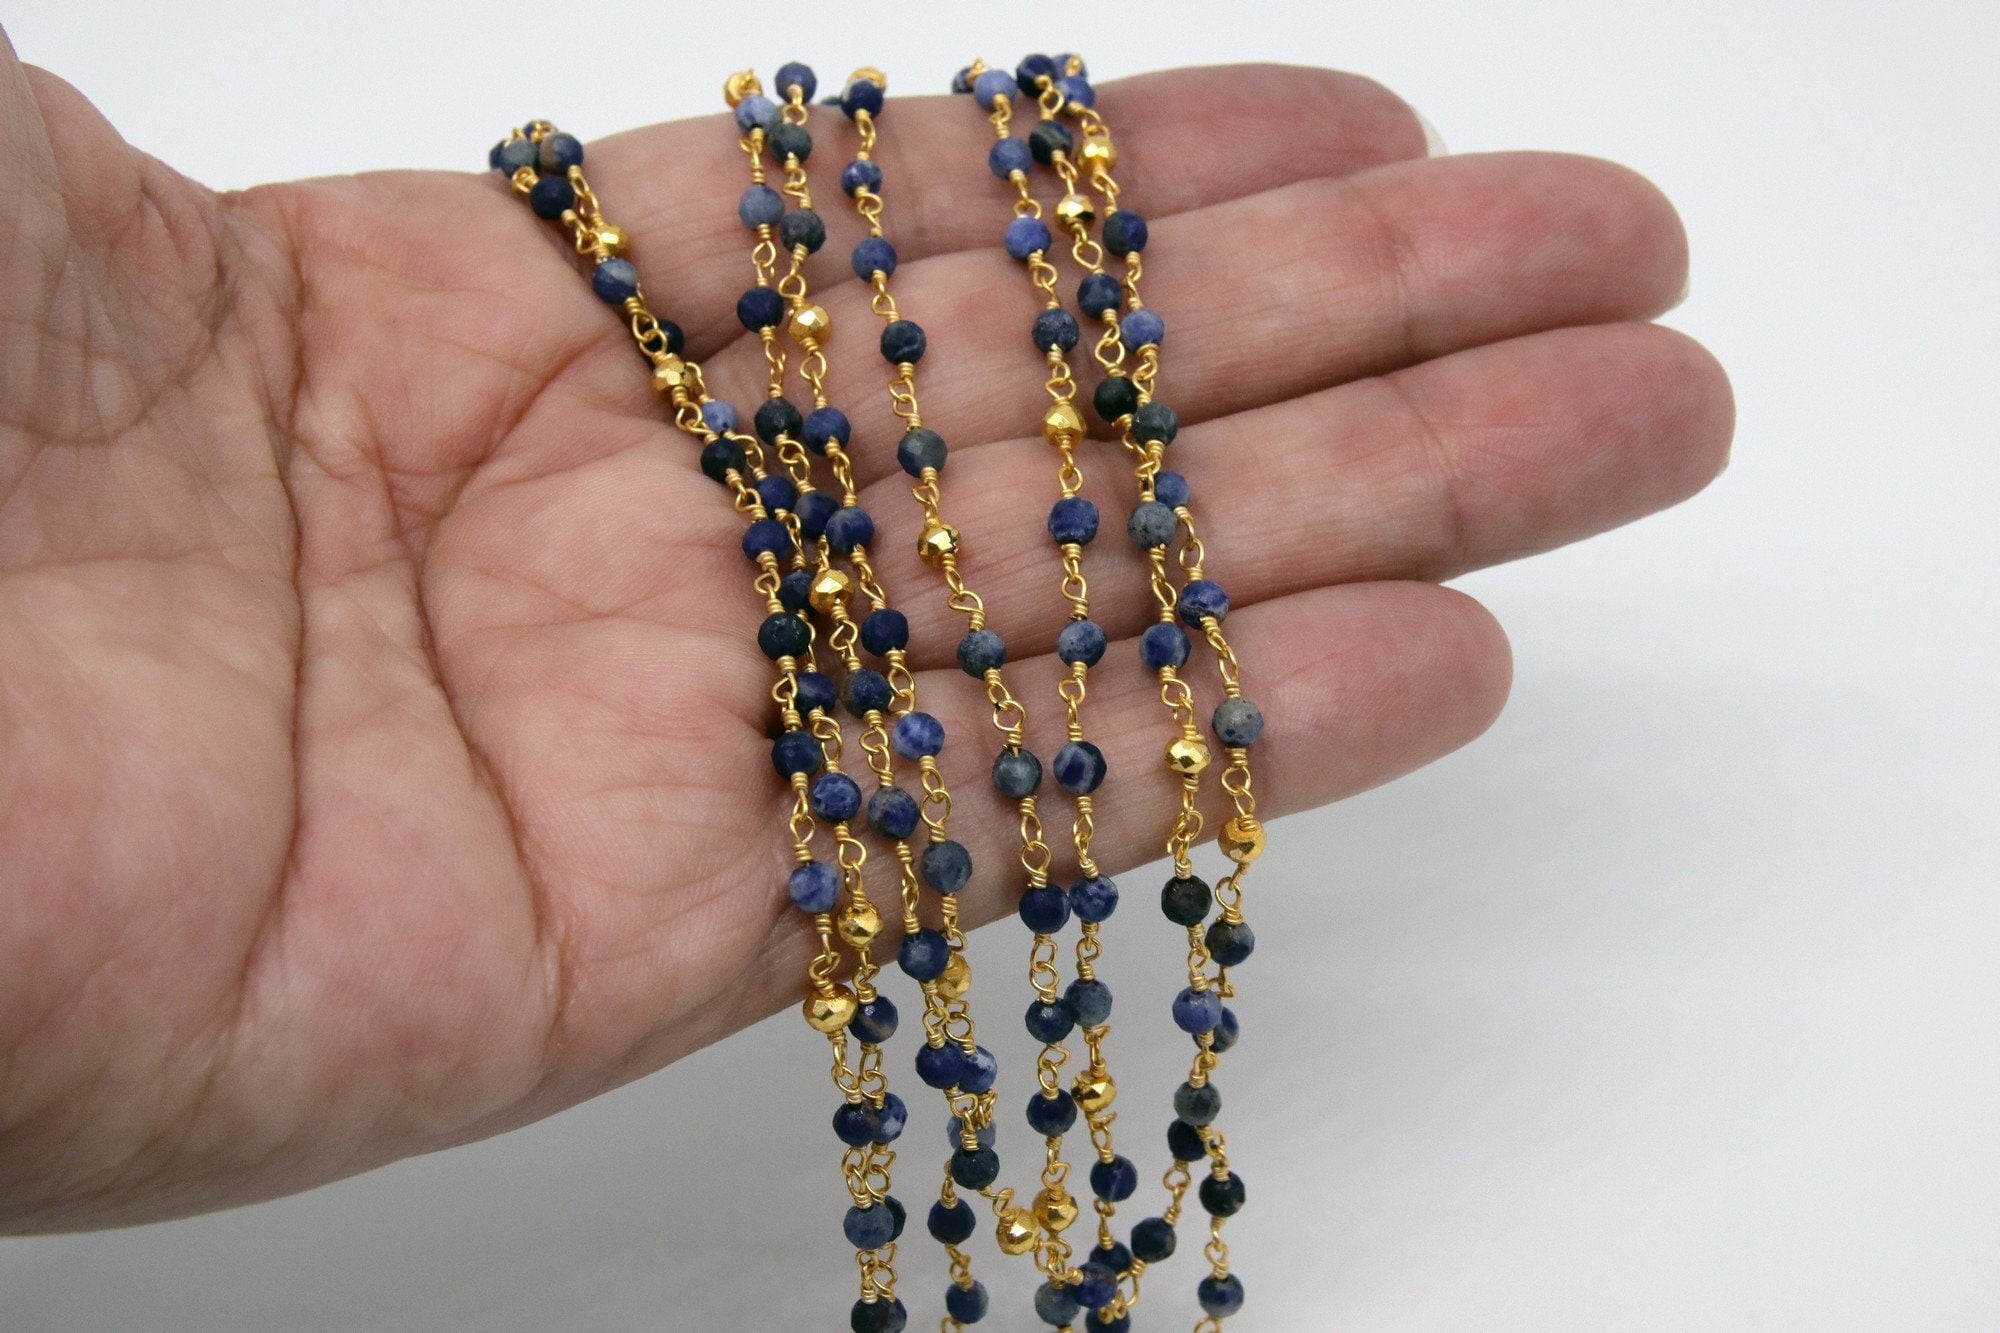 22k Gold Plated Sapphire Rosary Chain, Pyrite 4 mm Chains for Jewelry Making, Wire Wrapped Blue Beads Unfinished Chains